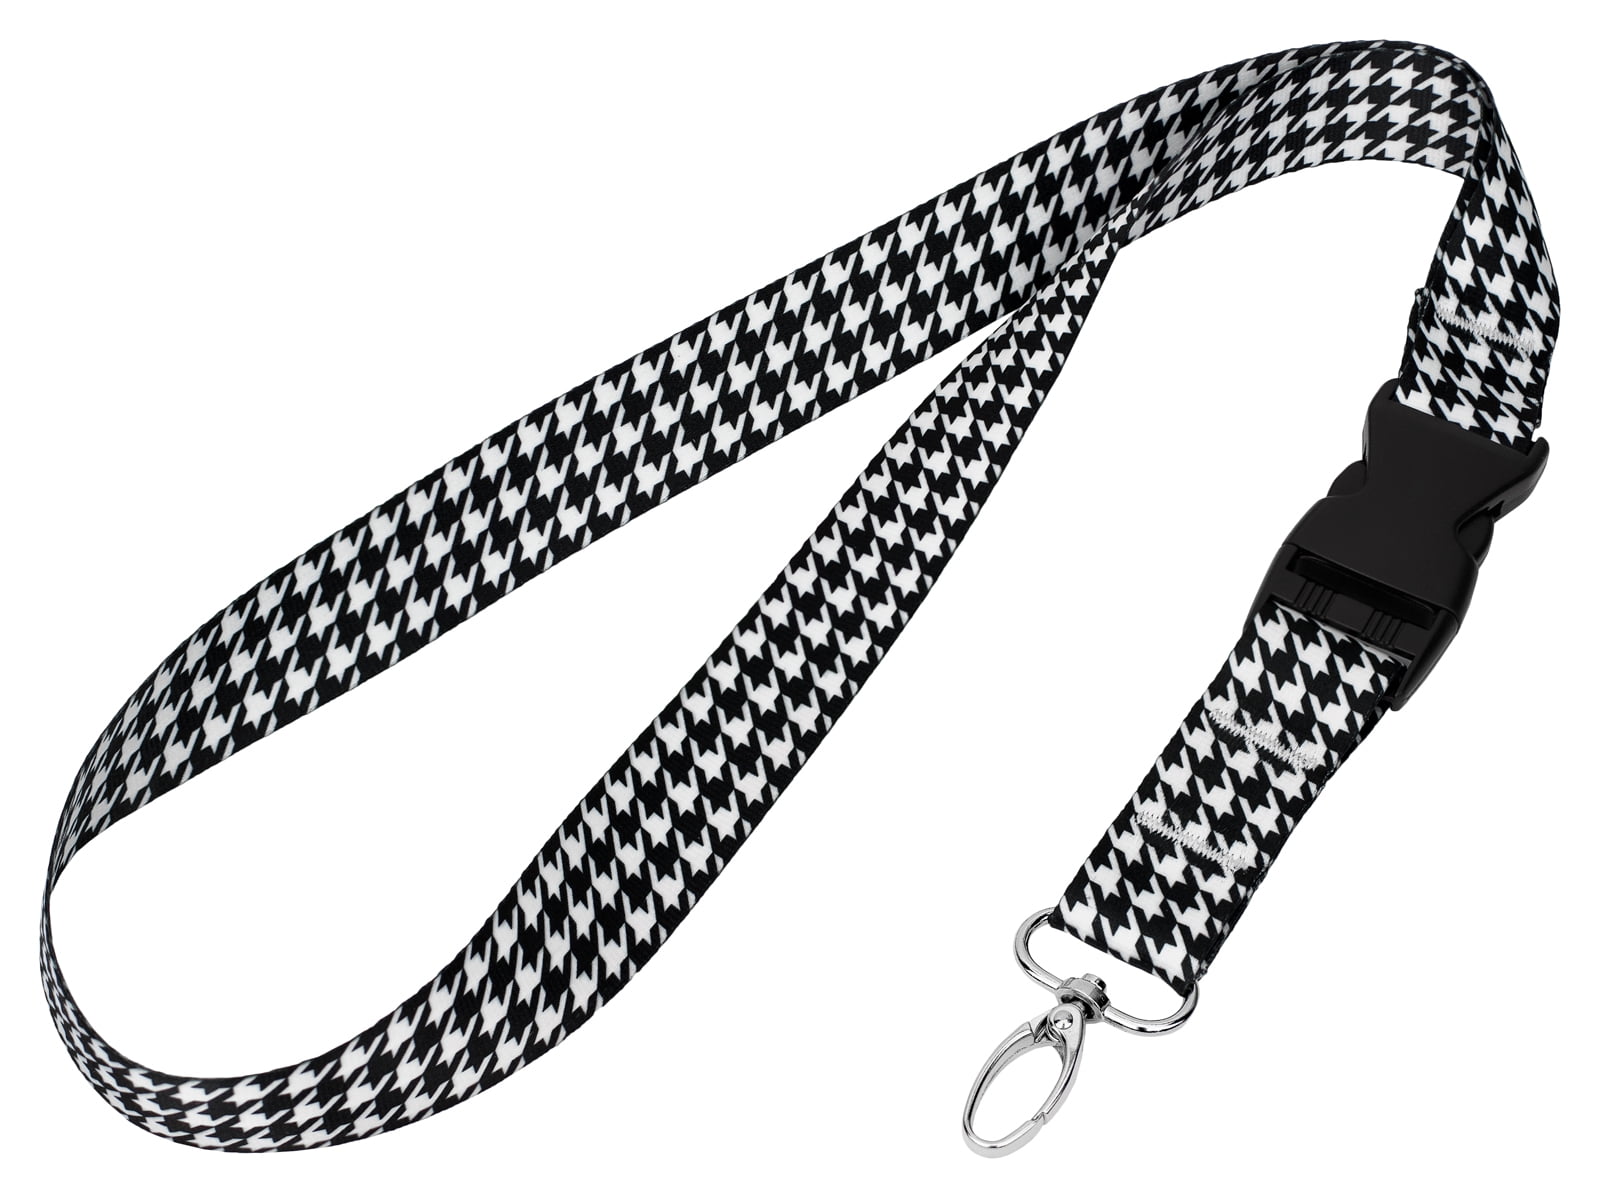 Houndstooth Lanyard for ID or Keys Fabric with Clip 